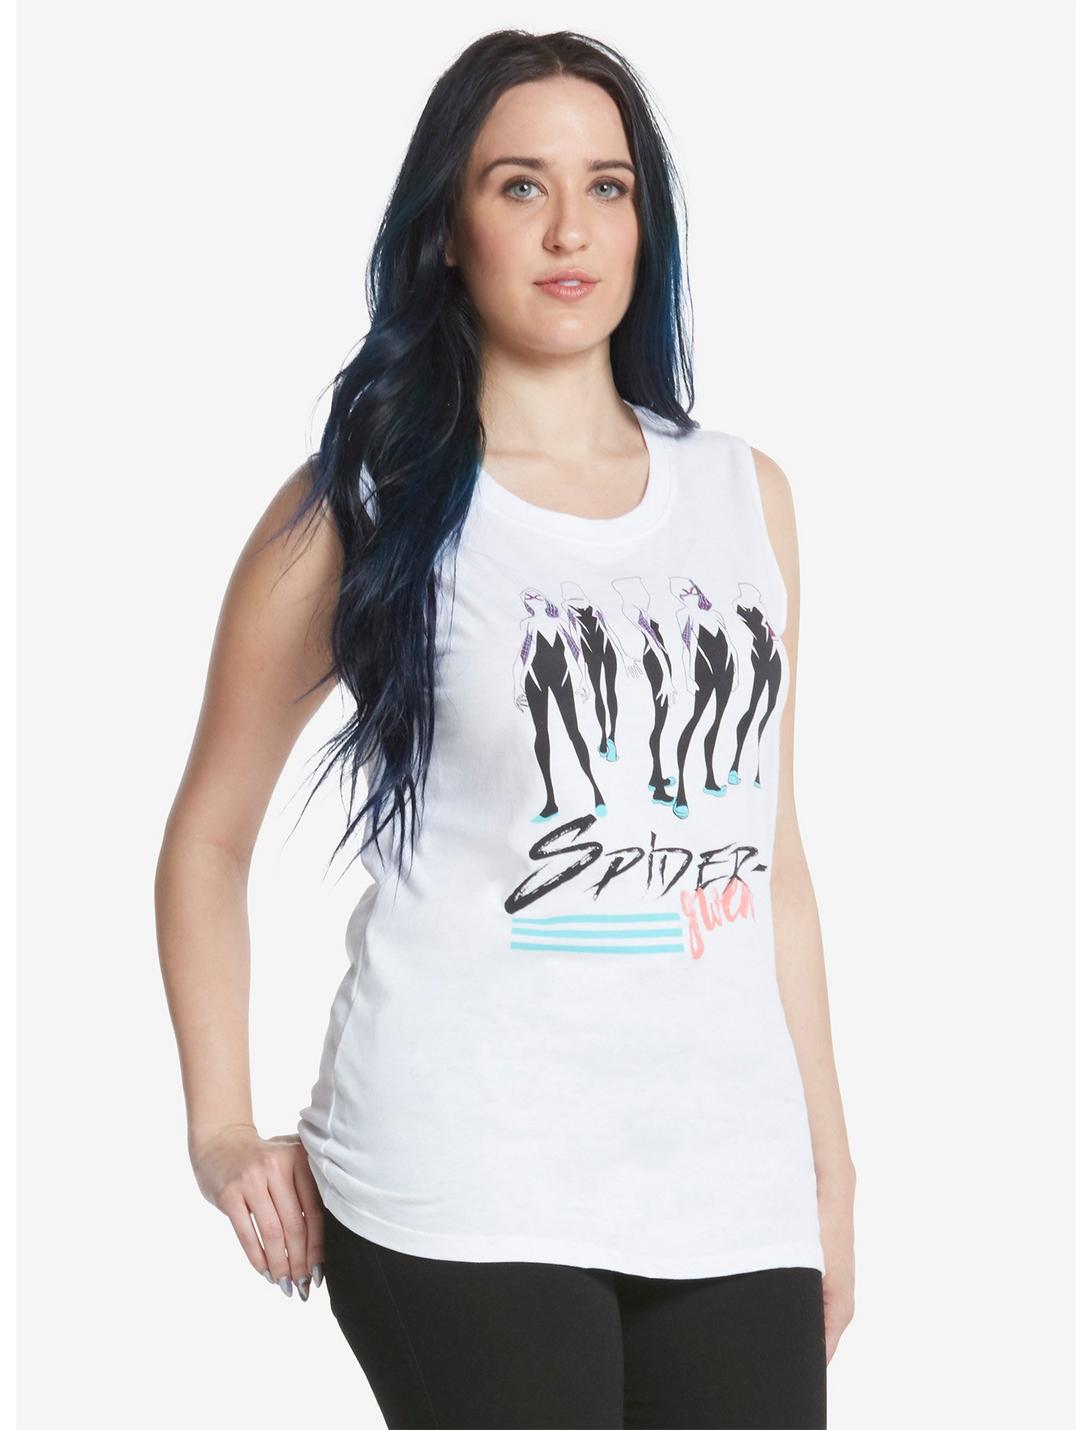 Marvel Spider-Gwen Muscle Tank Top, WHITE, hi-res